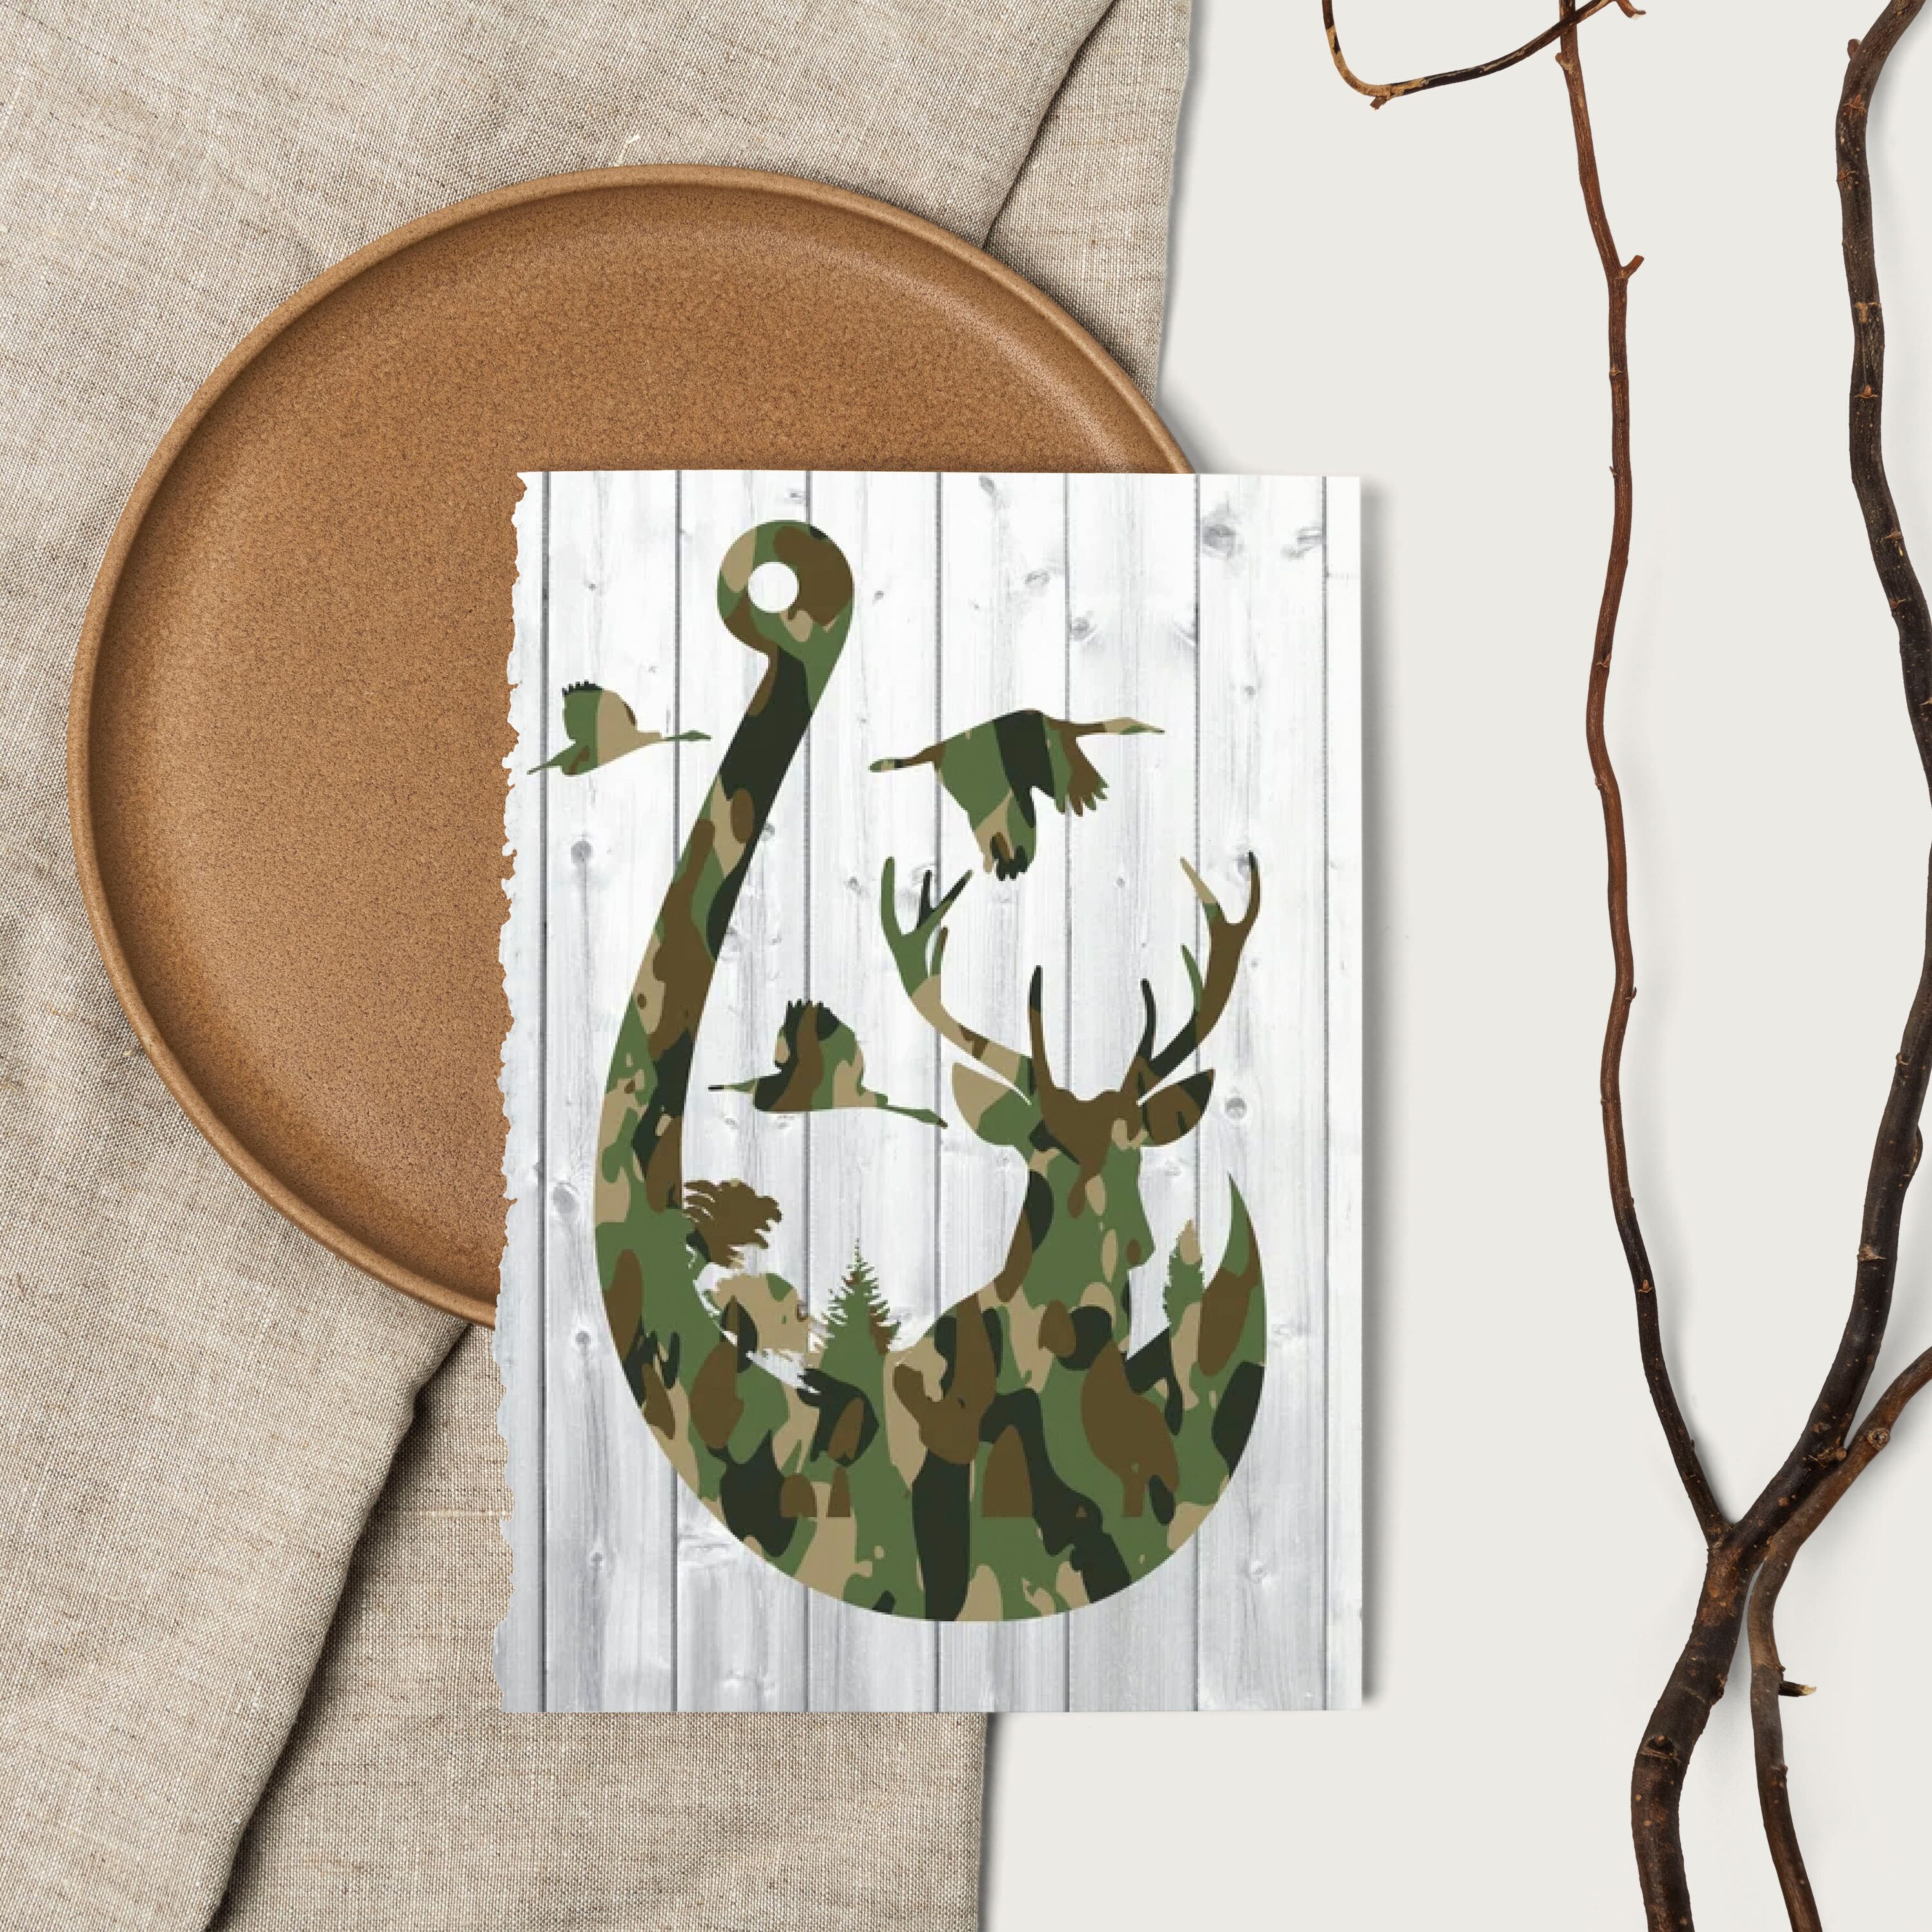 Duck Deer and Hook SVG cover.